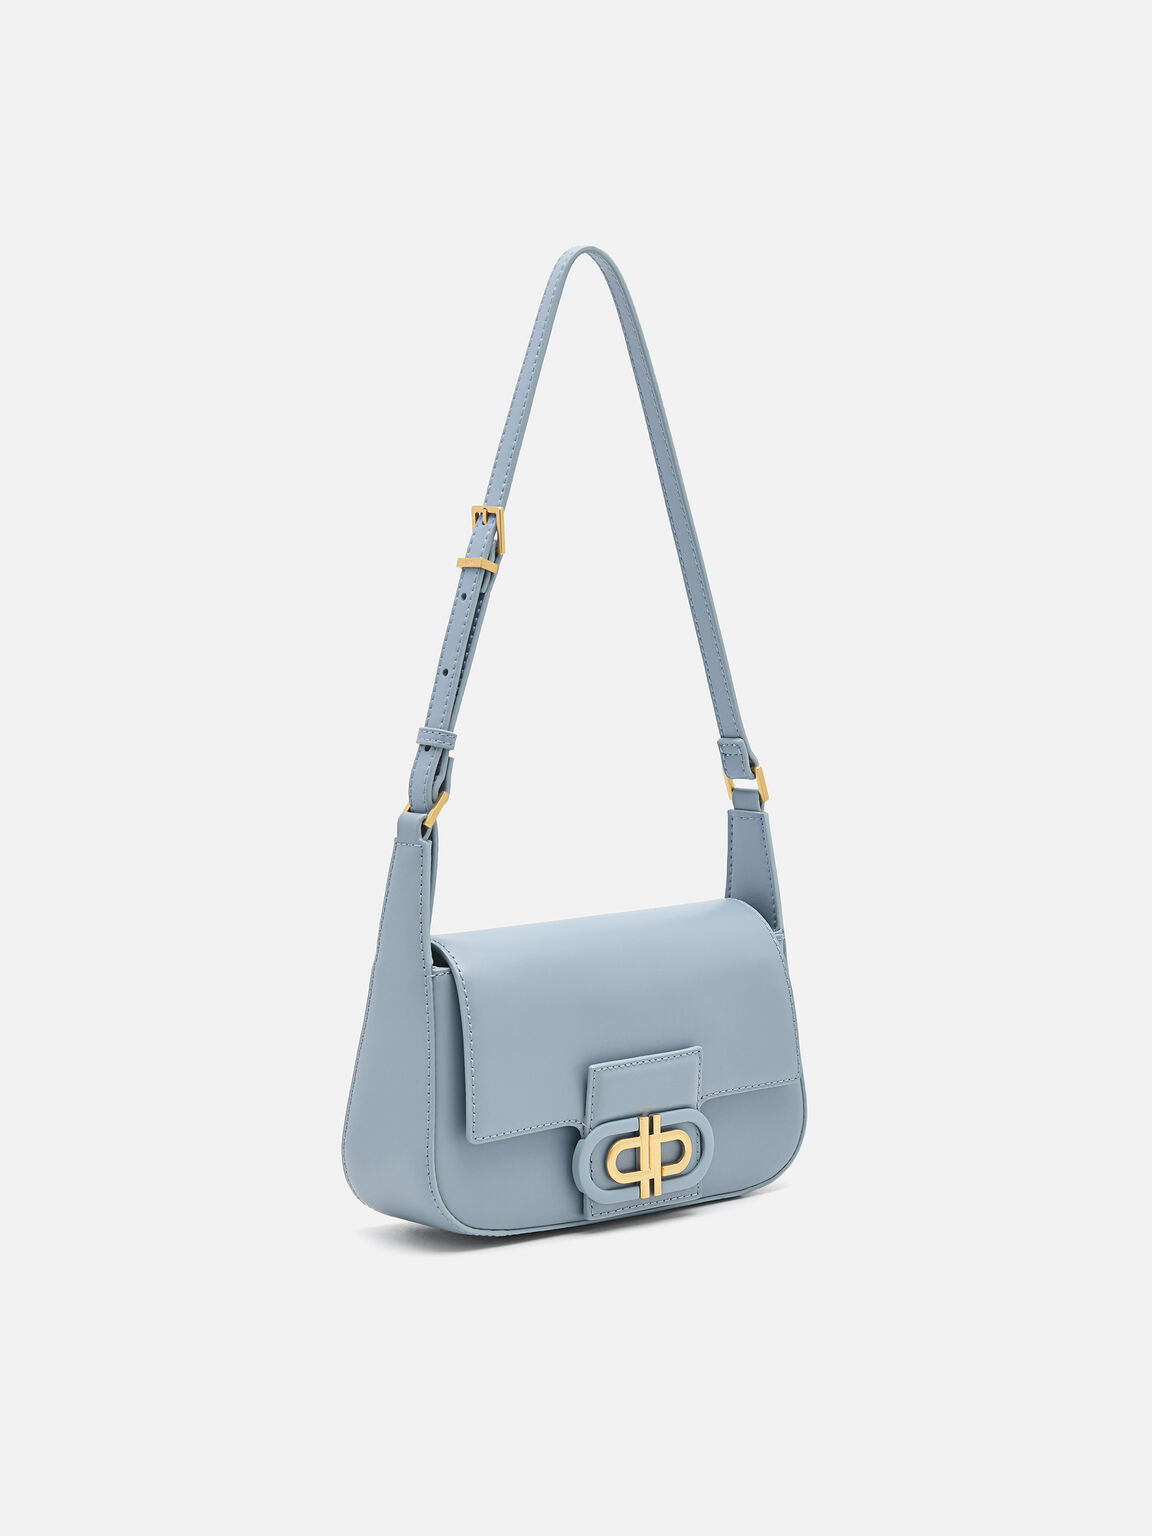 Pedro Bags, The best prices online in Malaysia